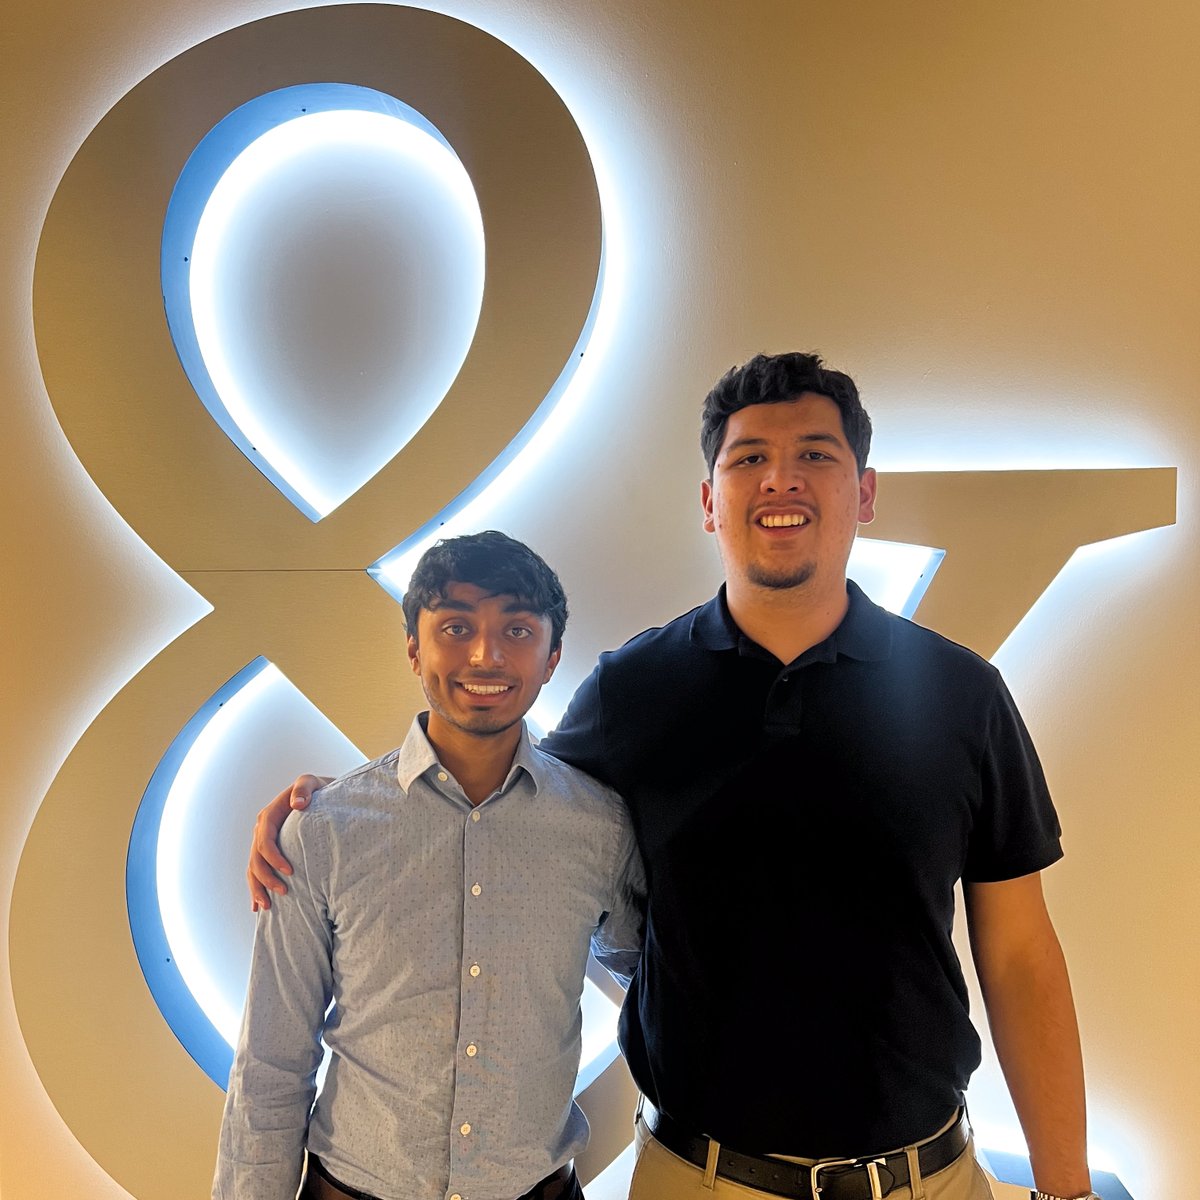 We had a great time hosting two students today as a part of the University of Georgia’s Intern for a Day program. Excited to see how these young professionals flourish in their career!